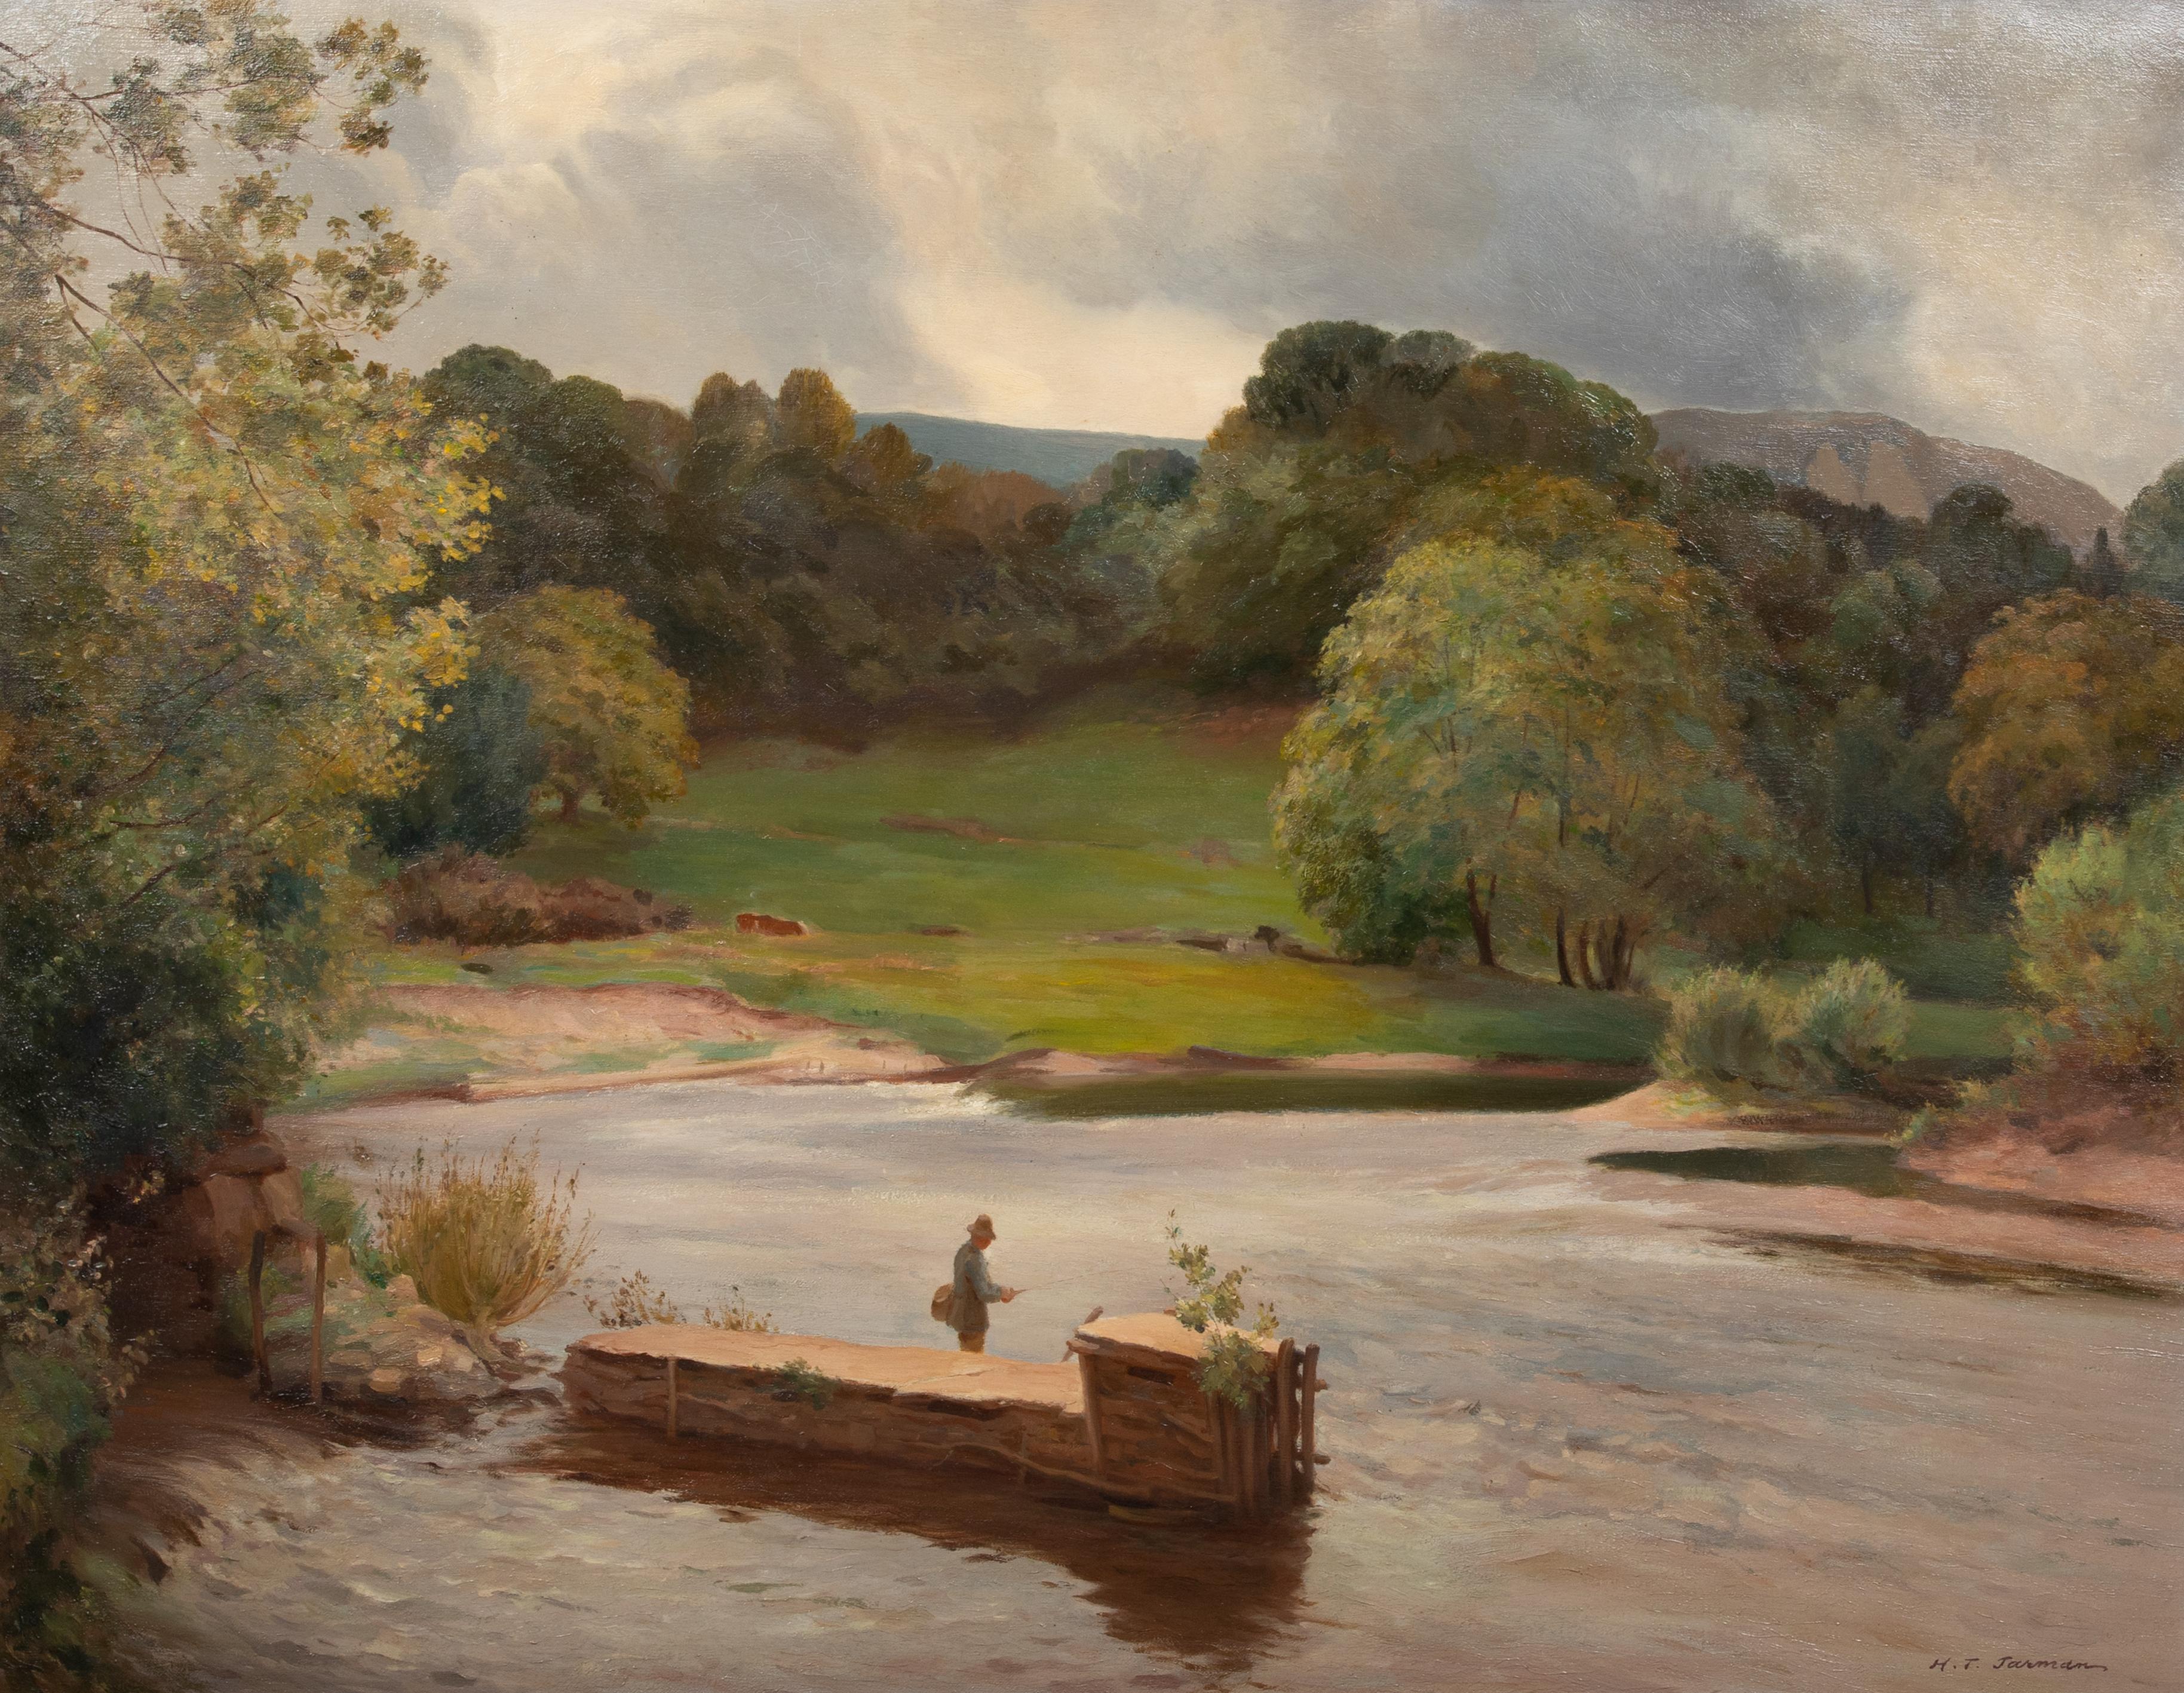 Fly Fishing At Aber Clydach River Brecon Beacons, circa 1900

by Henry Thomas Jarman (1871-1956)

Large 19th Century view of a figure fly fishing at Aber Clydach, Brecon Beacons, oil on canvas by Henry Thomas Jarman. Excellent quality and condition